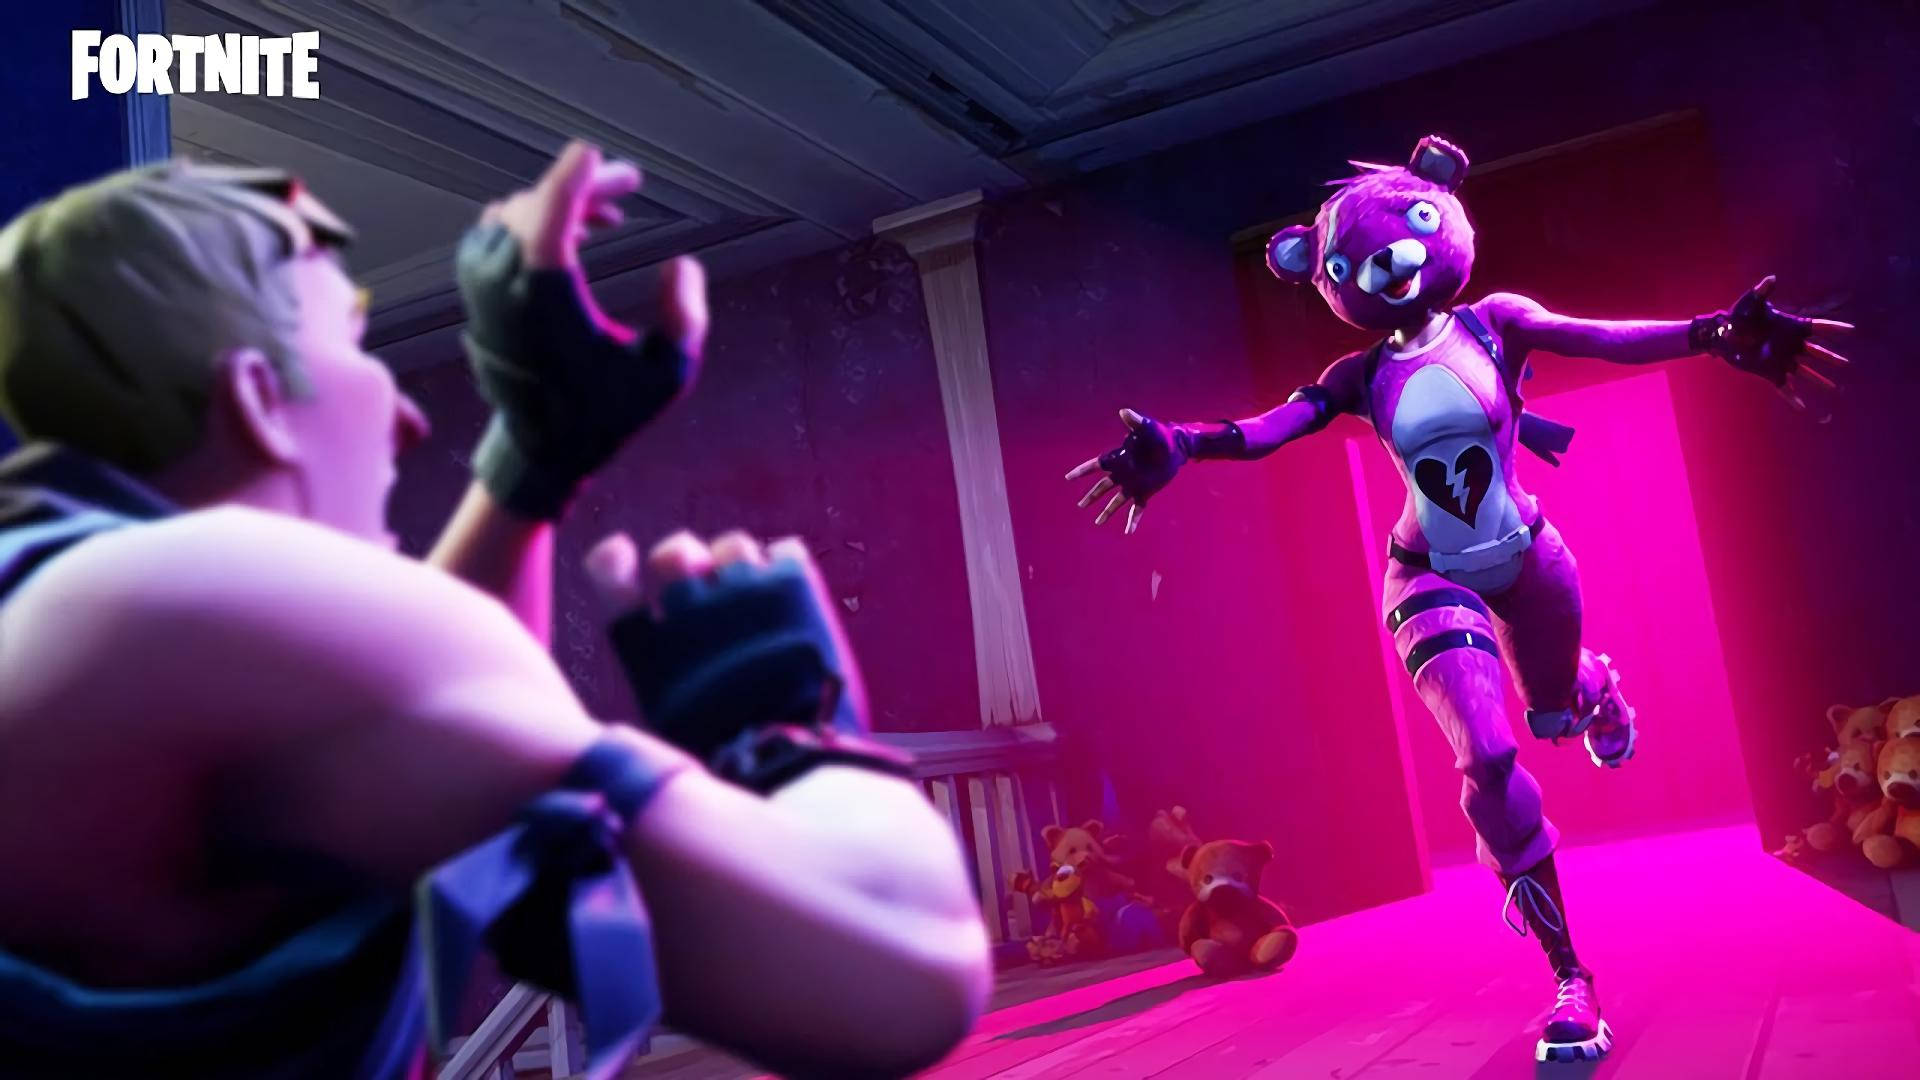 Scary And Cool Fortnite Cuddle Leader Wallpaper